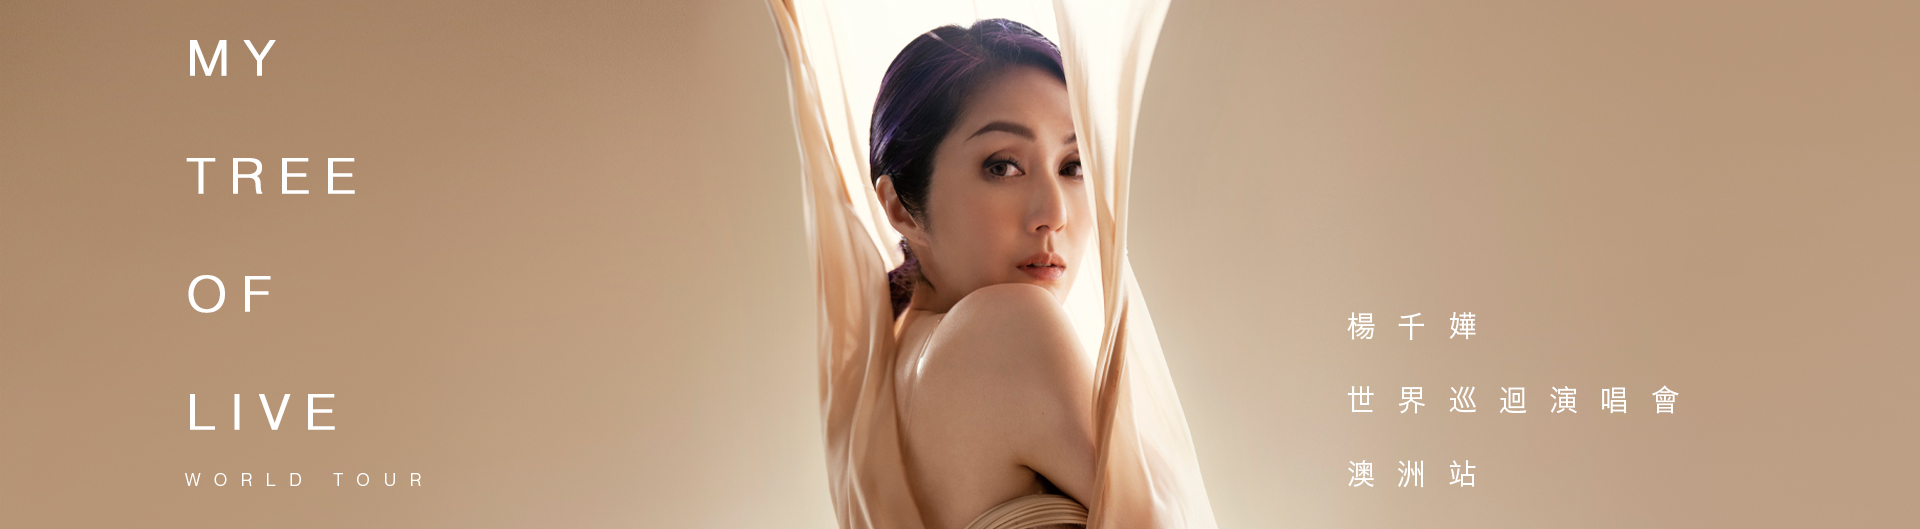 Miriam Yeung My Tree of Live Tour is coming to ICC Sydney Theatre on Wednesday 3 April 2024.